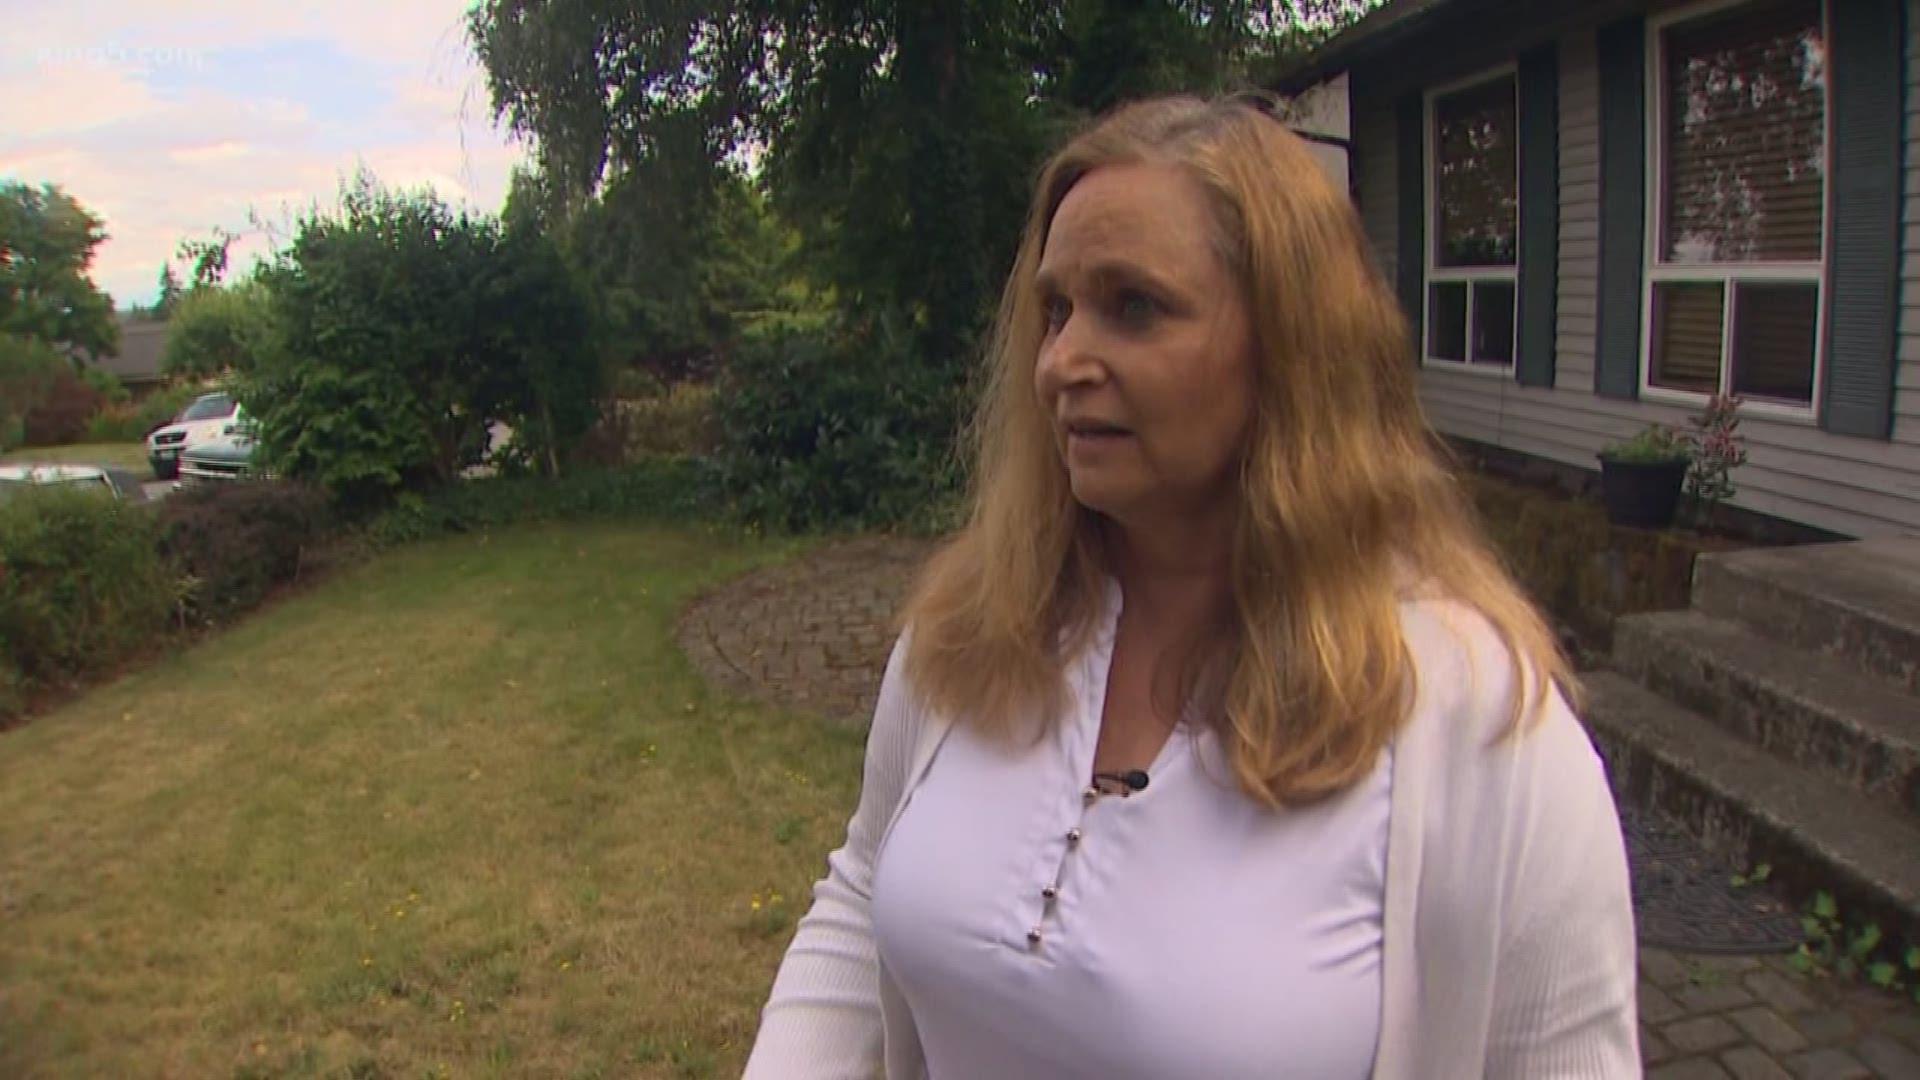 A Redmond family is furious after they said a Puget Sound Energy contractor entered their backyard and pepper sprayed their two dogs. KING 5's Natalie Swaby reports.